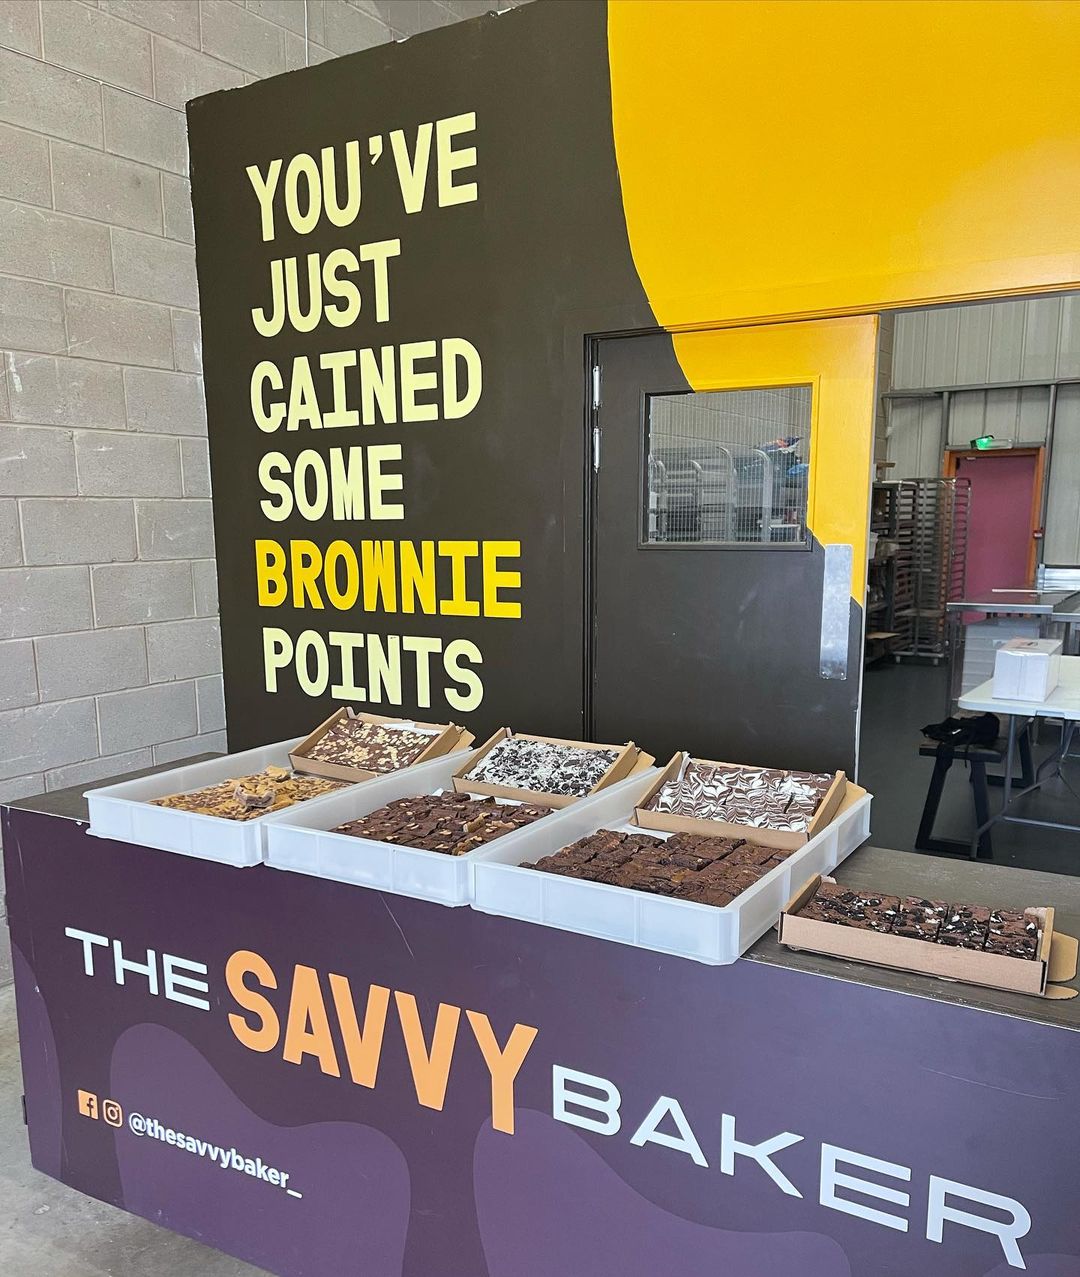 The Savvy Baker HQ, the location of the Halloween small business event.